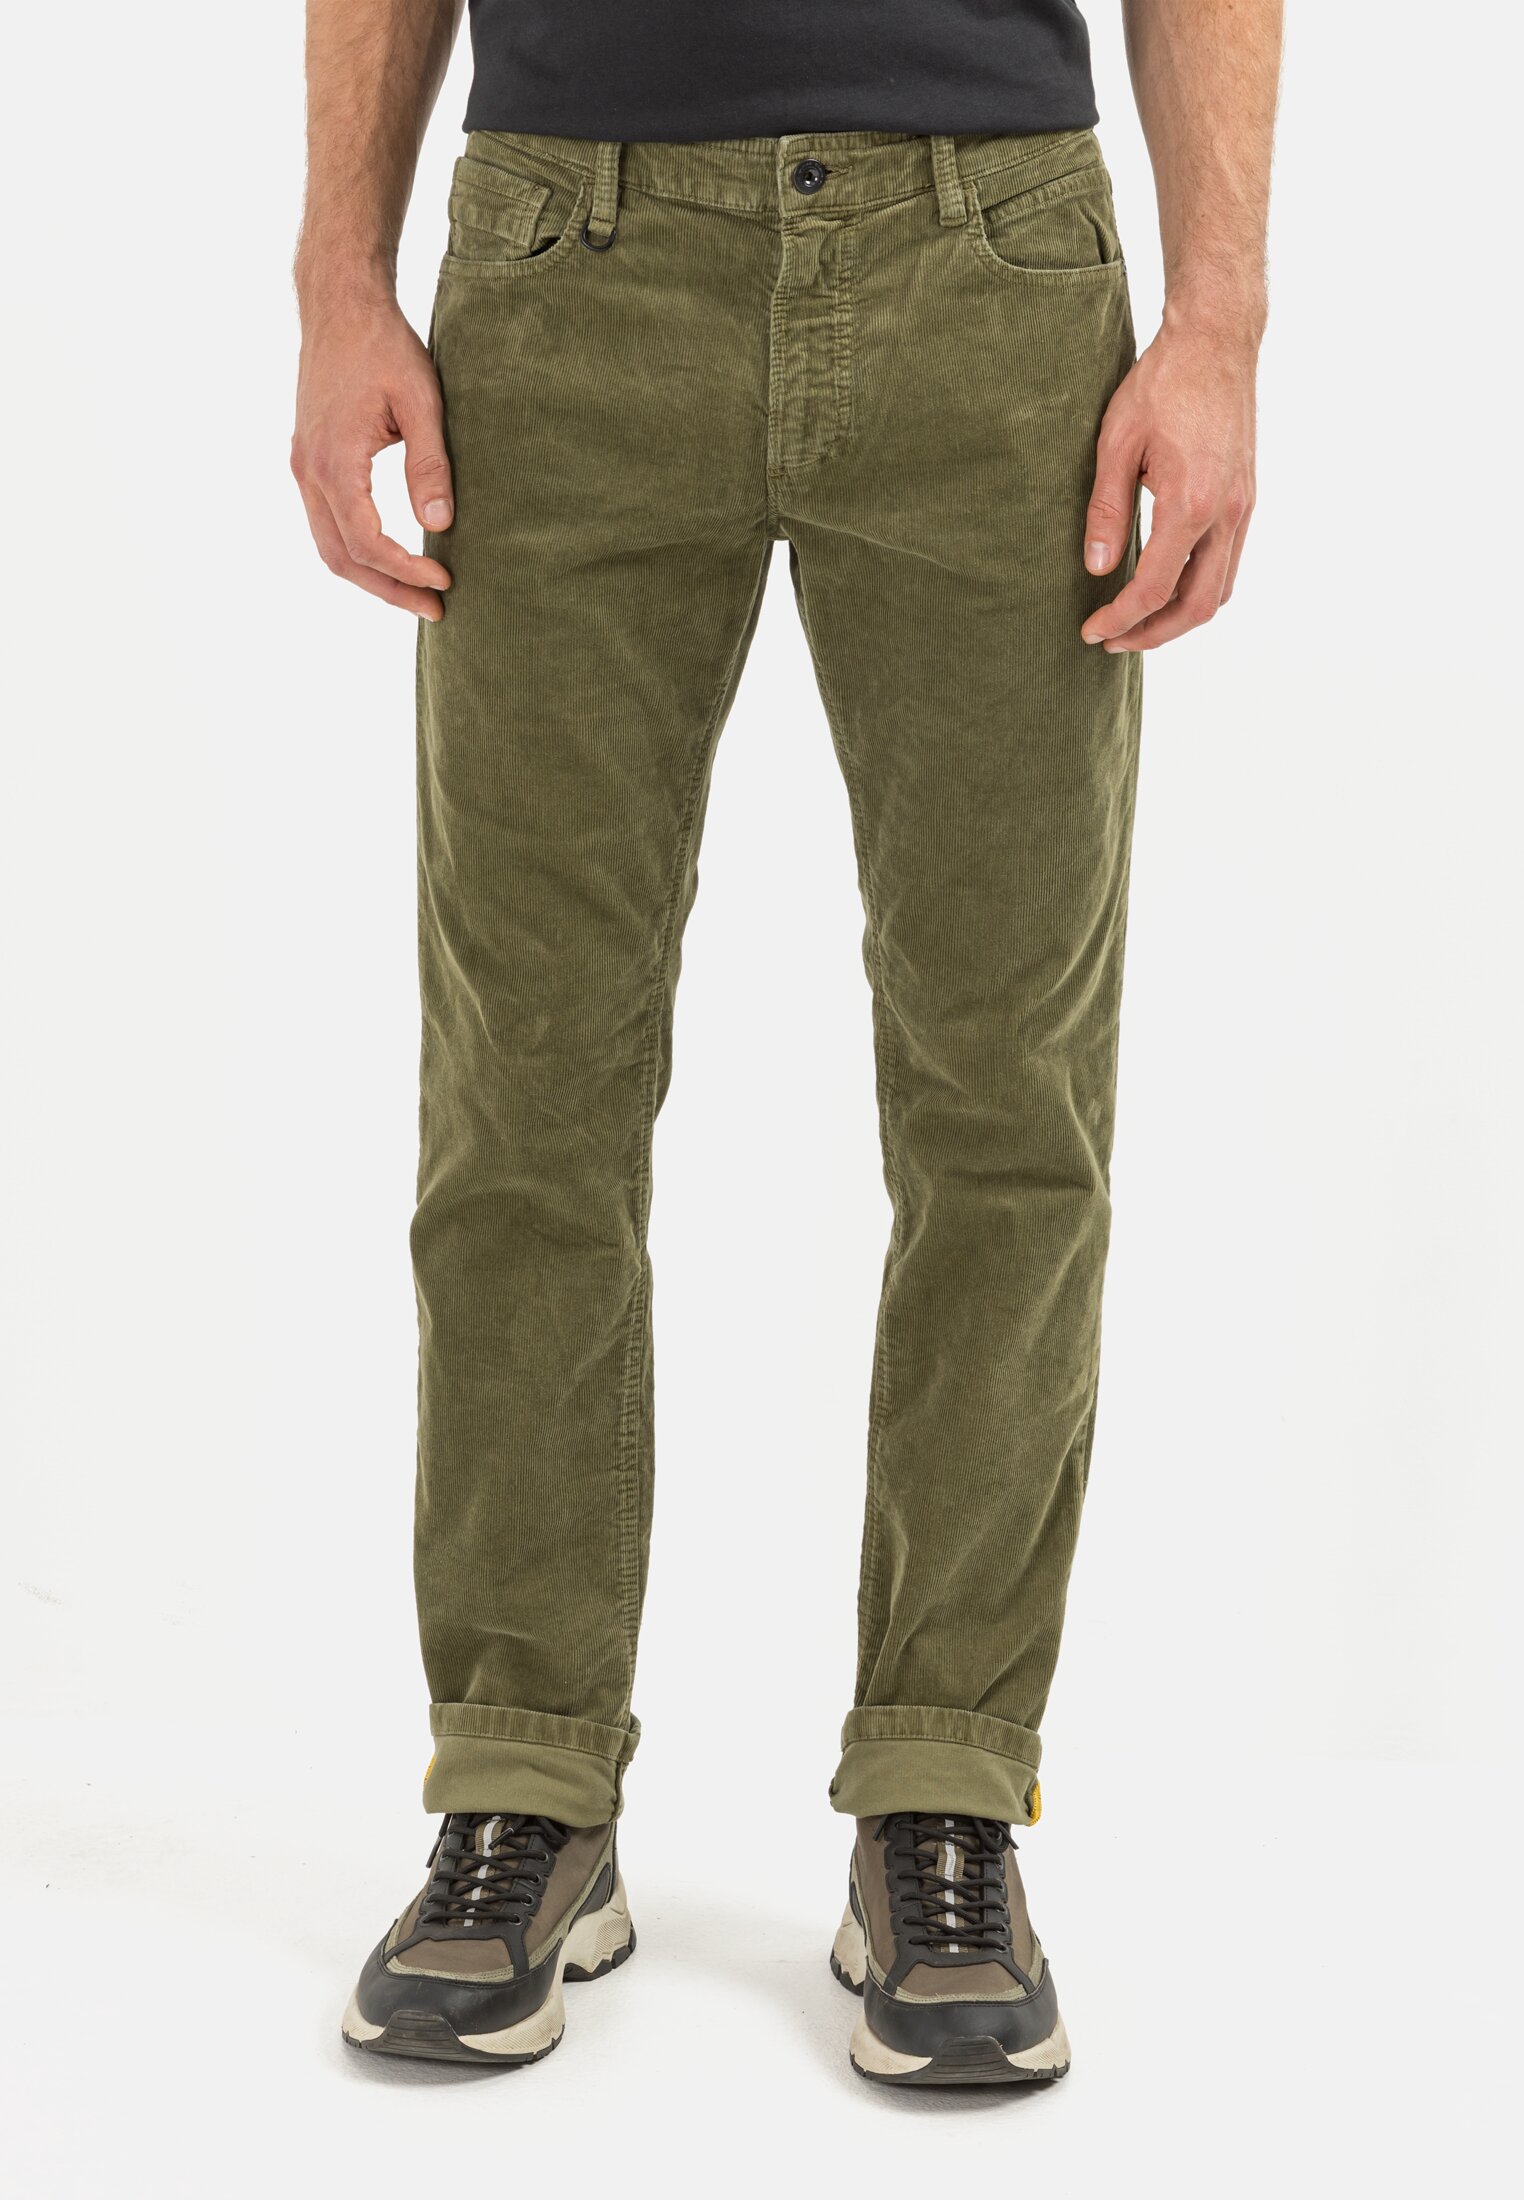 Camel Active 5-pocket trousers in Regular fit